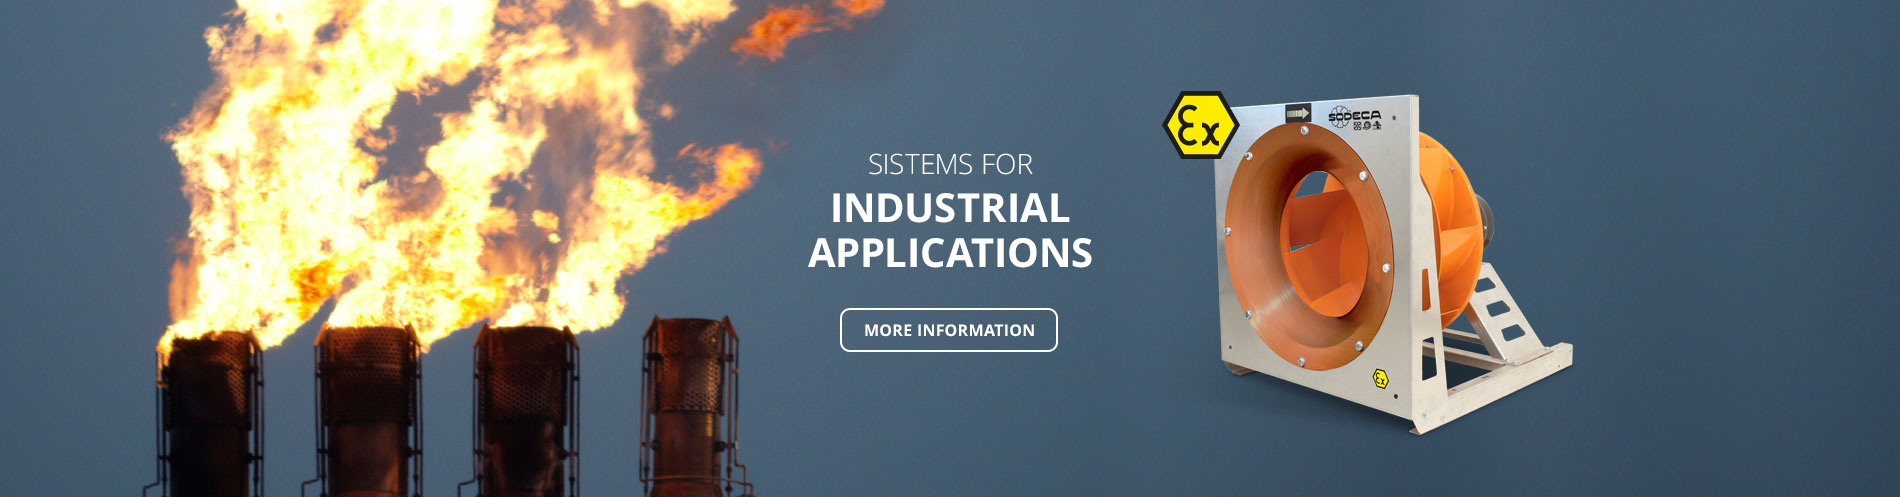 Sistems for industrial applications